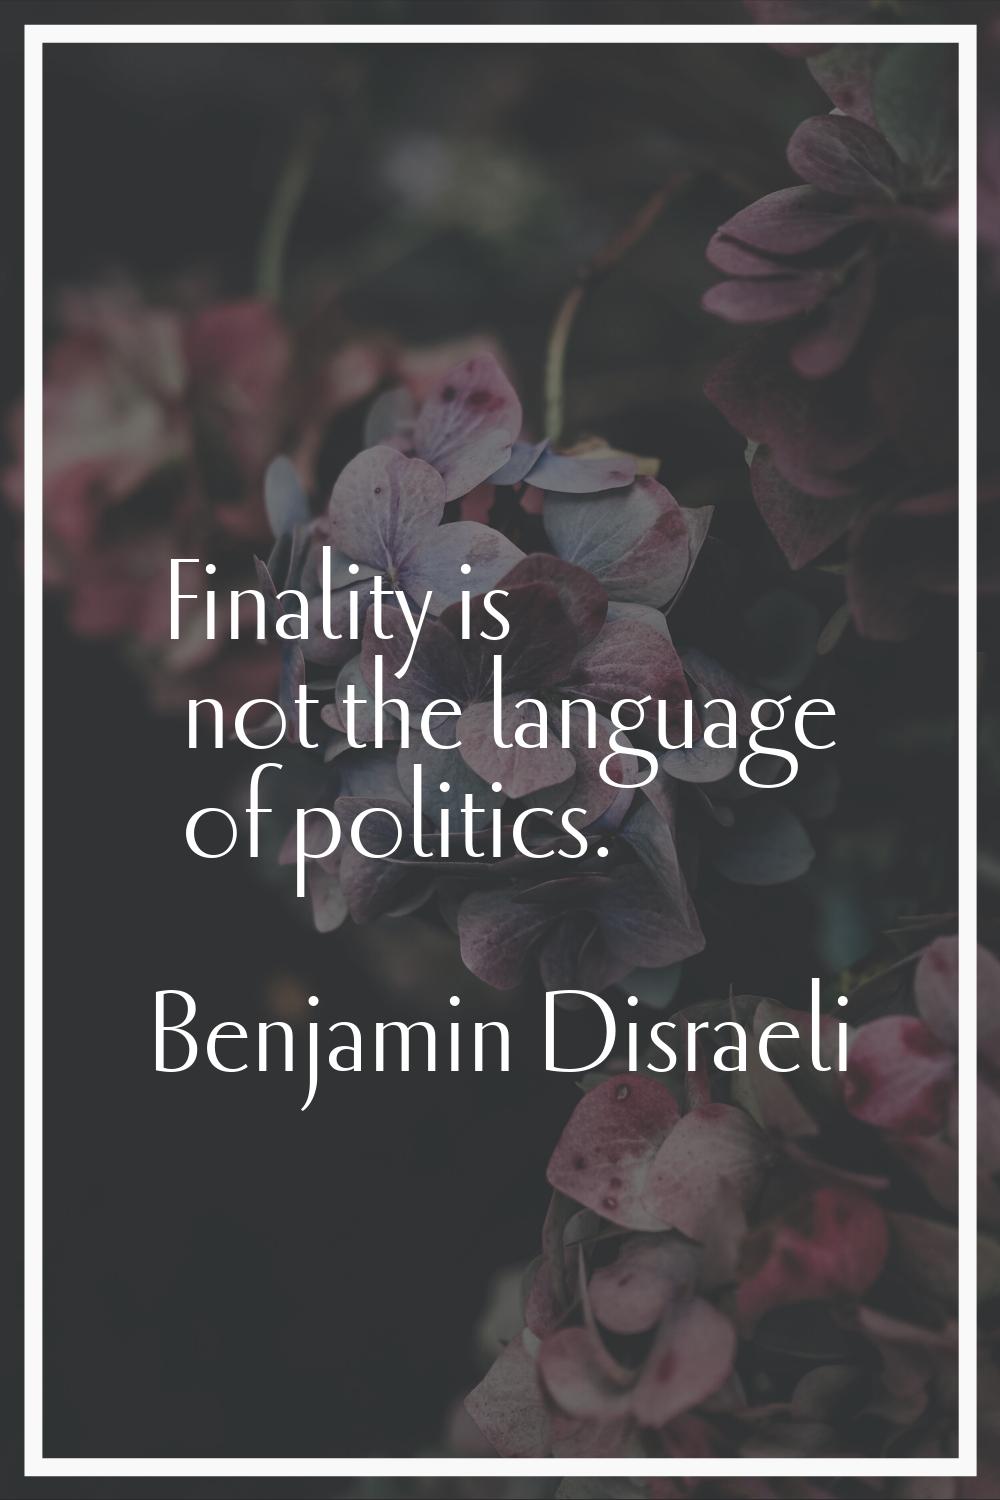 Finality is not the language of politics.